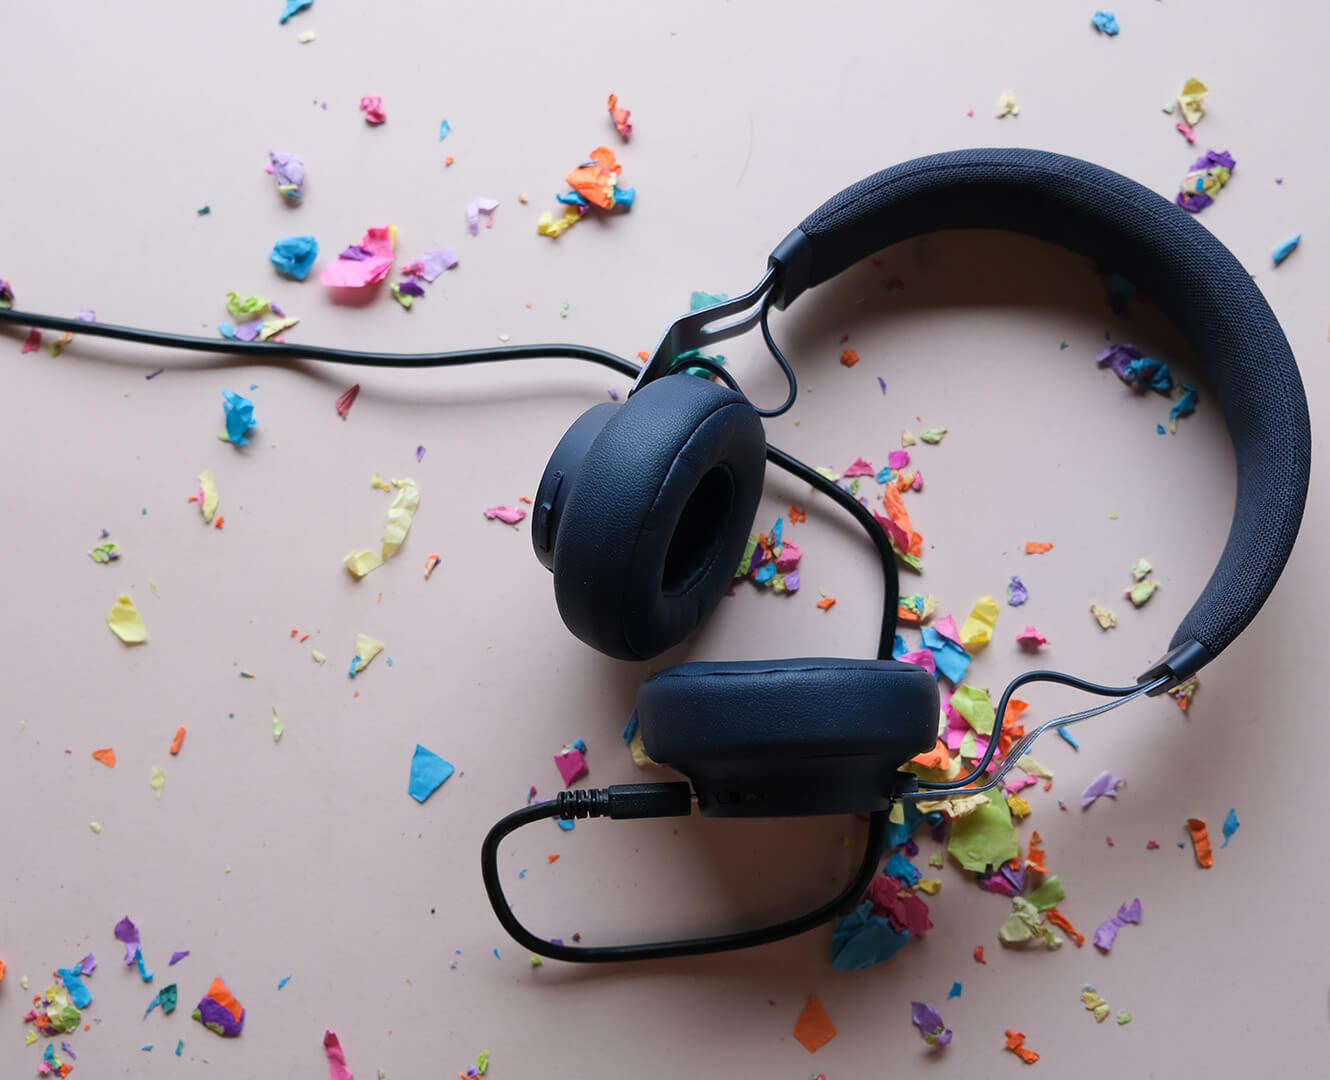 headphones sit on a desk with confetti